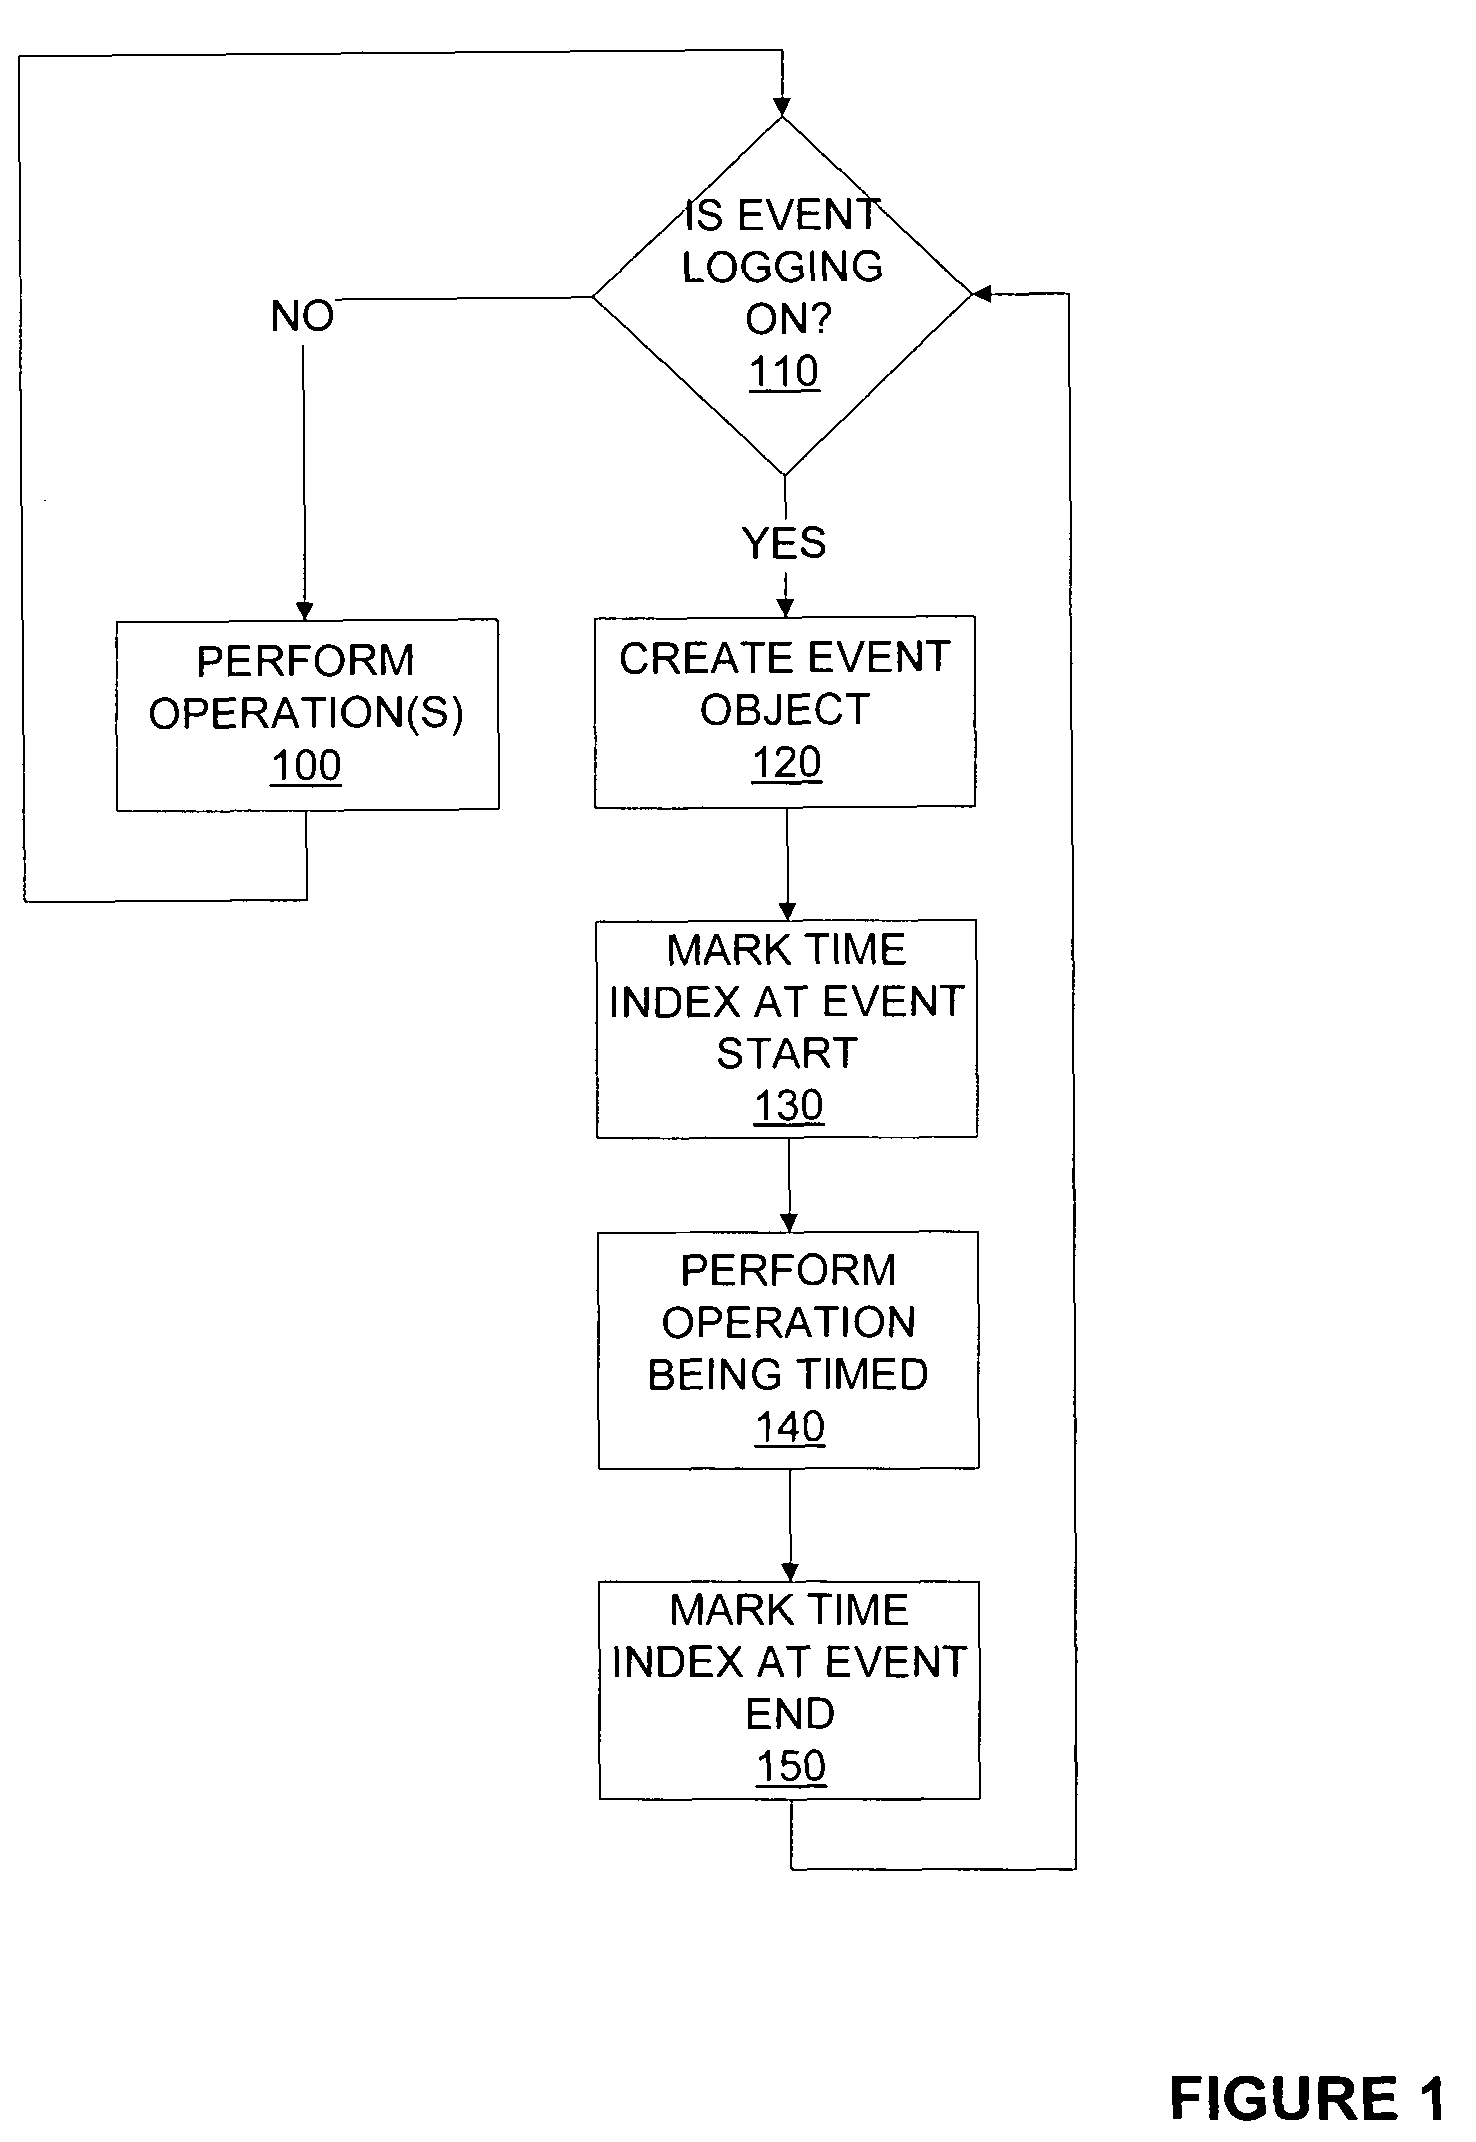 Event logging and performance analysis system for applications